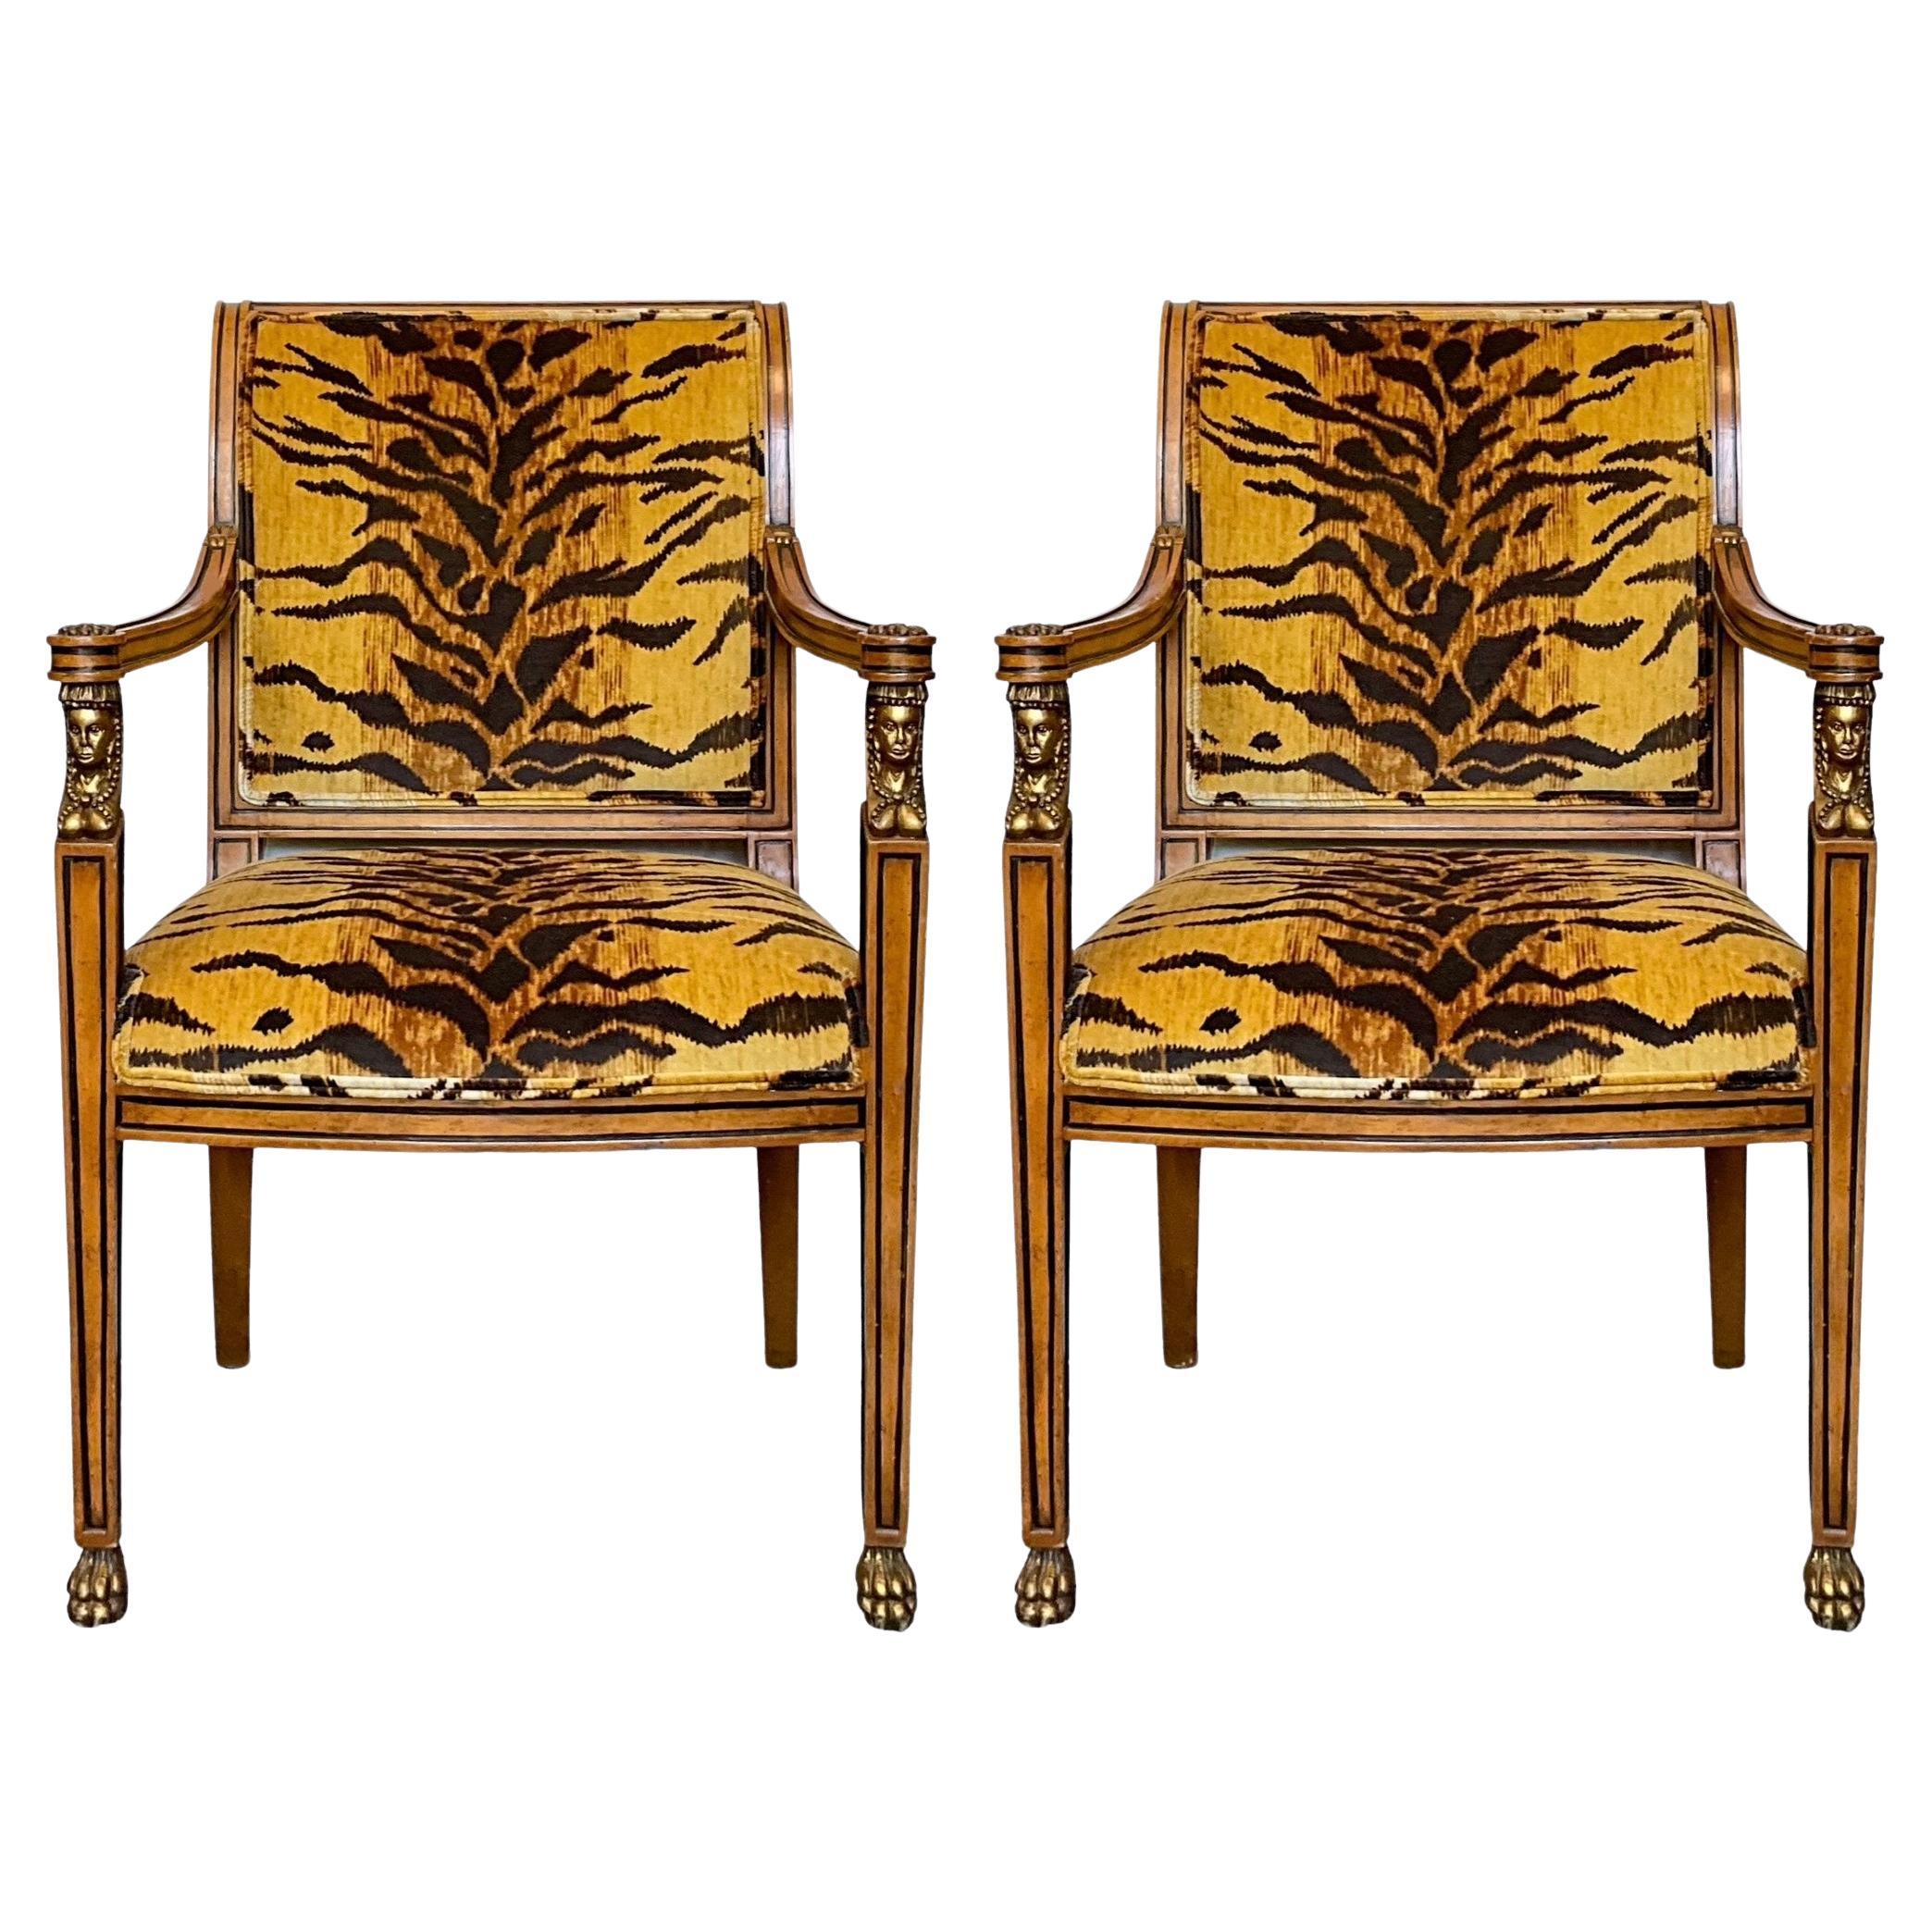 Early 20th-C. Egyptian Revival Style Bergere Chairs In Tiger Velvet - Pair For Sale